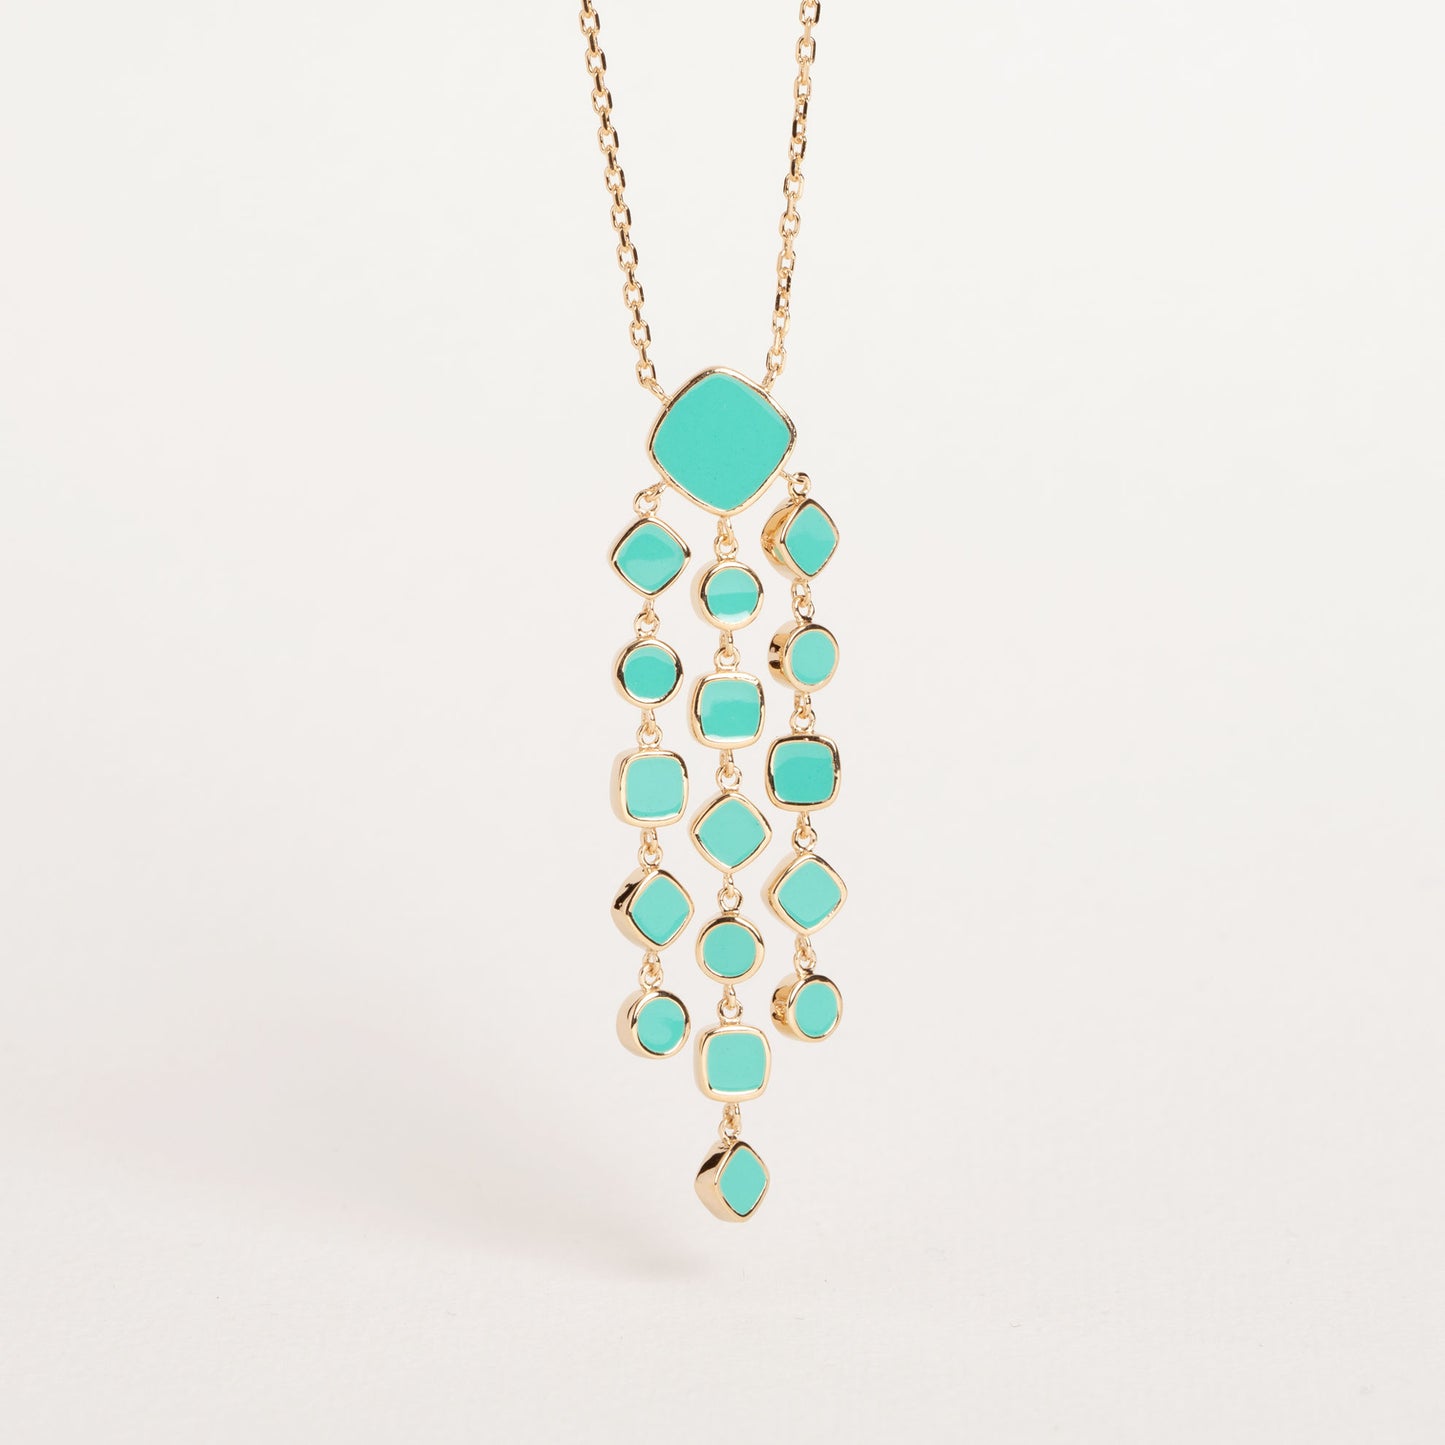 Alba - Turquoise - Gold Plated Necklace - Ana et Cha